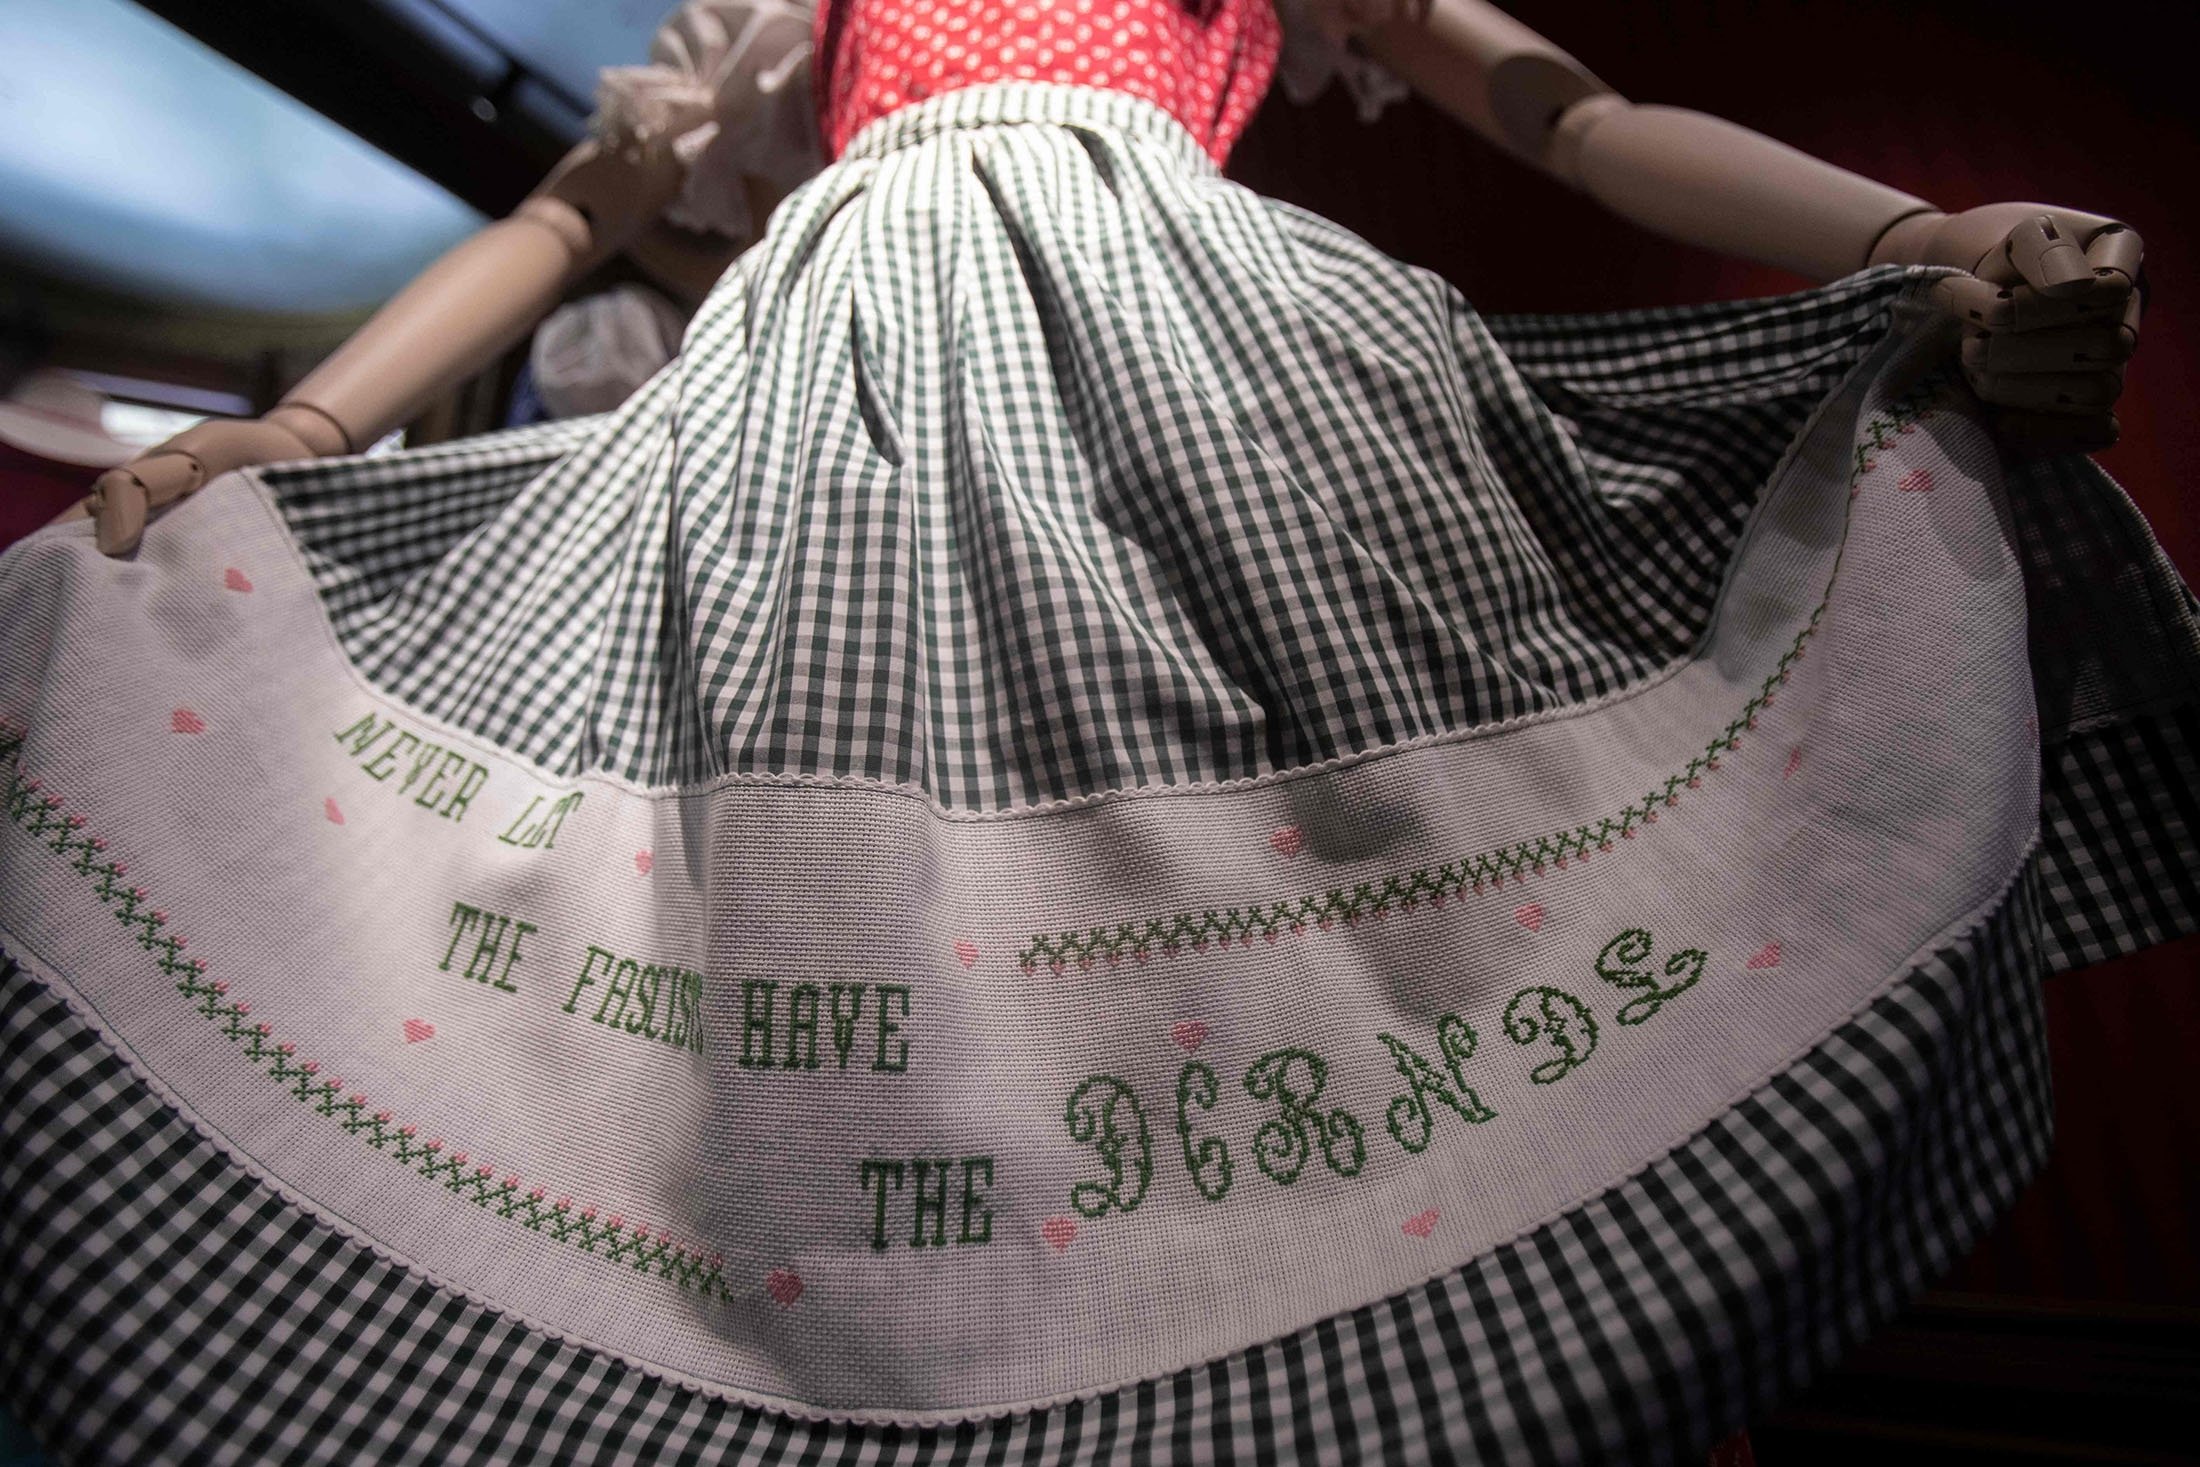 A dirndl dress with the stitched lettering 